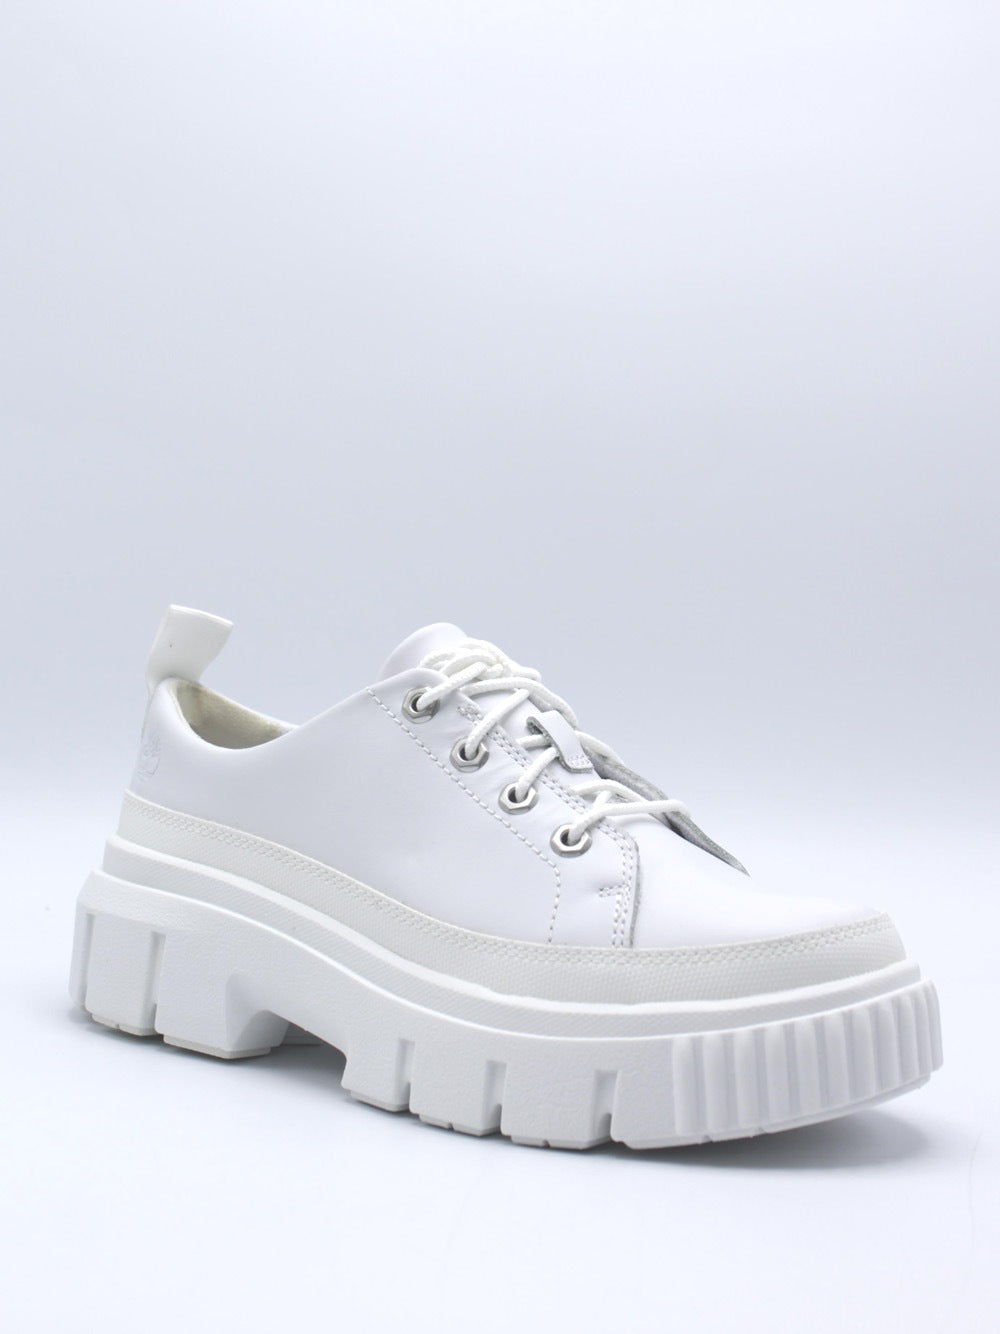 TIMBERLAND Sneakers Donna - Bianco